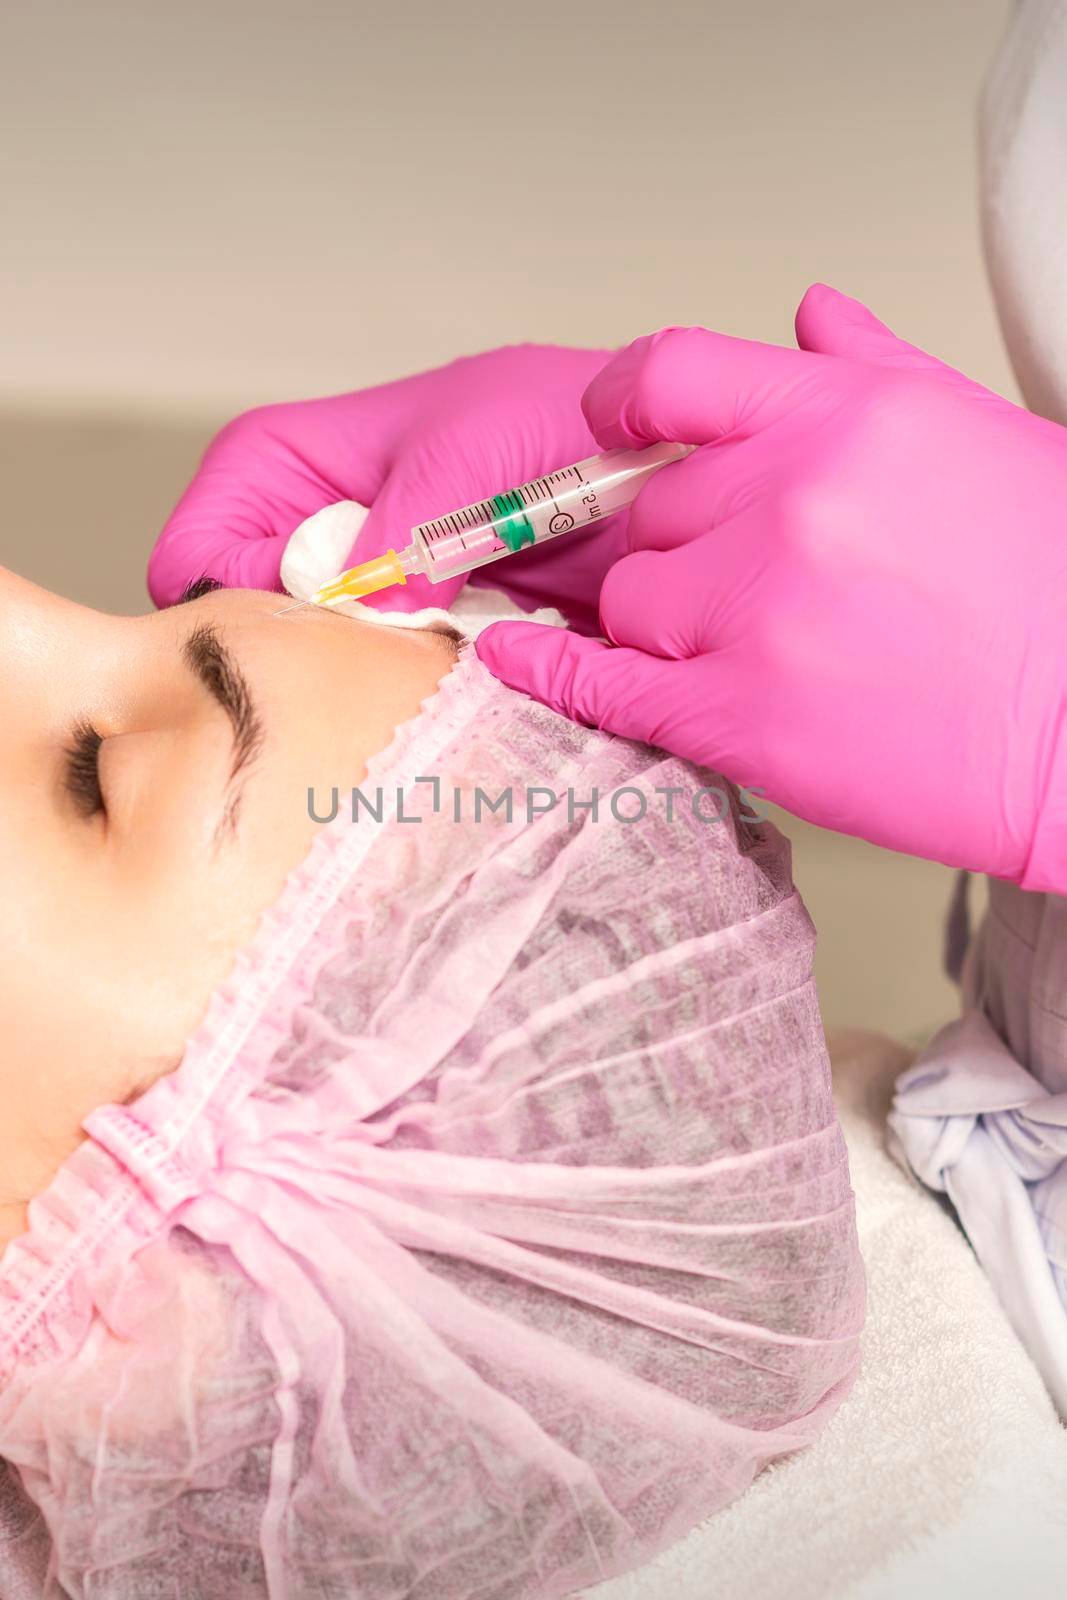 Young woman receiving an injection of anti-aging botox filler to the forehead from a cosmetologist in a beauty salon. Facial treatment injection